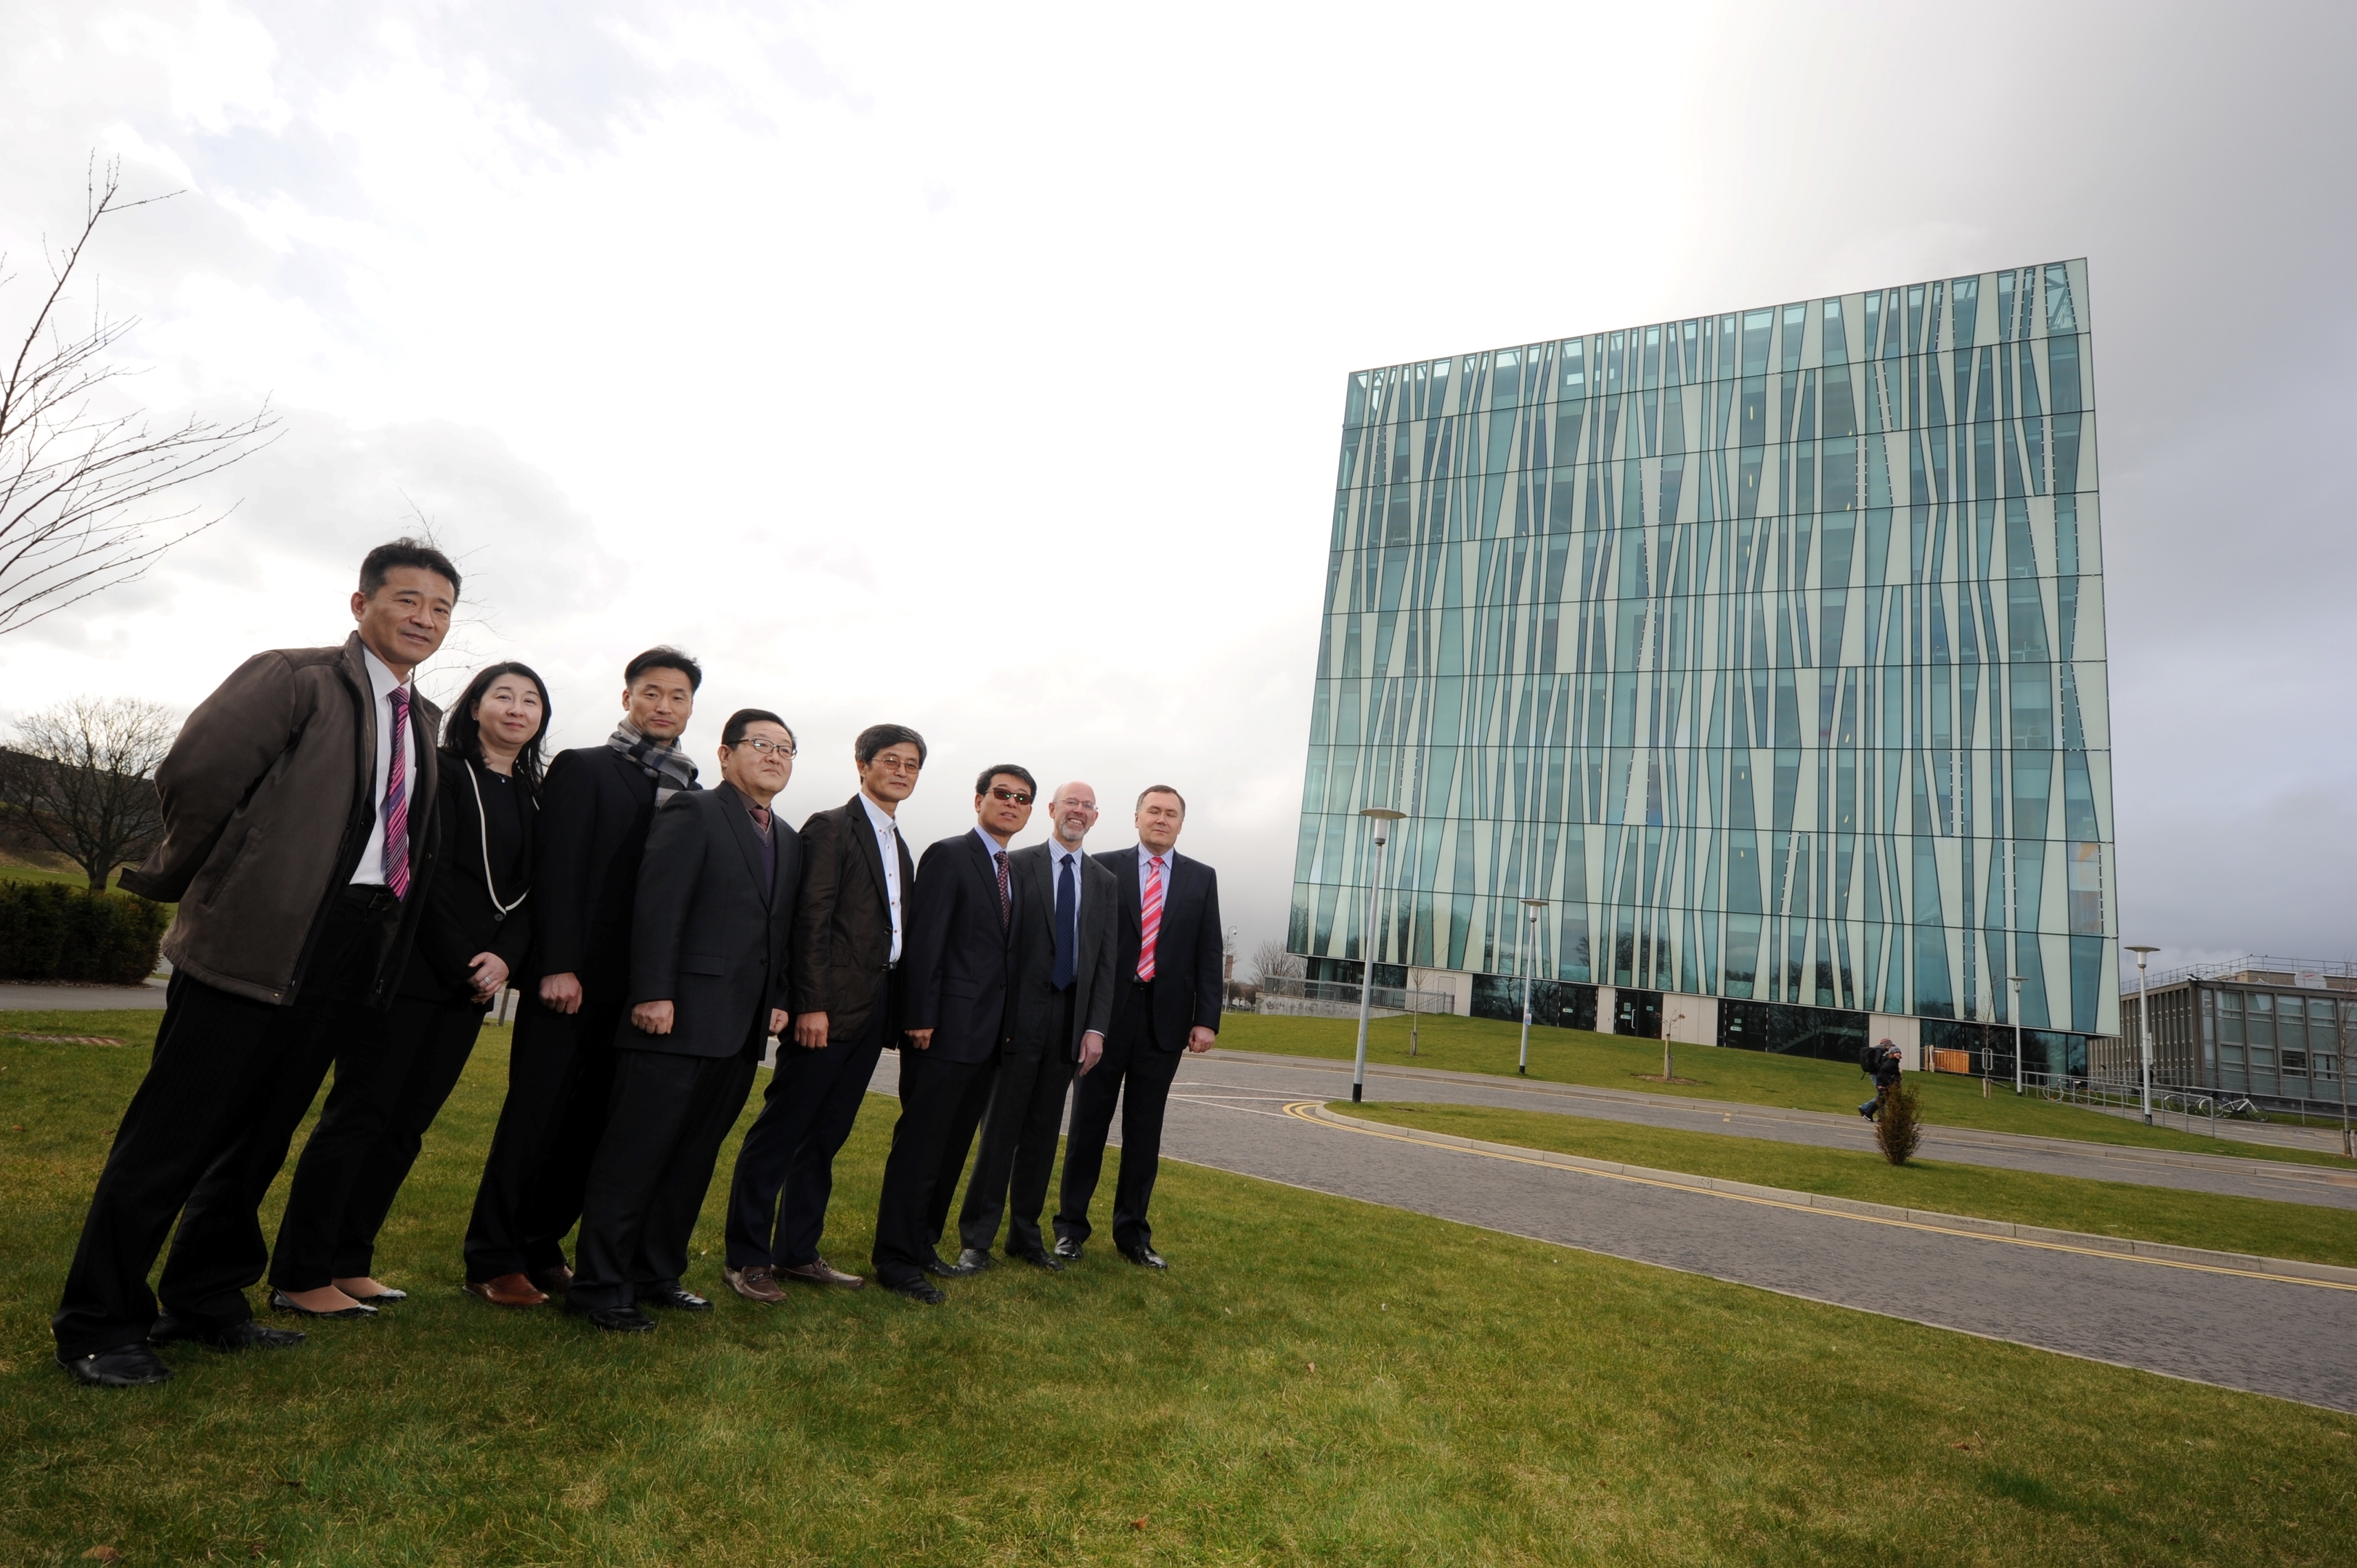 Delegates from South Korea visited the university earlier this week